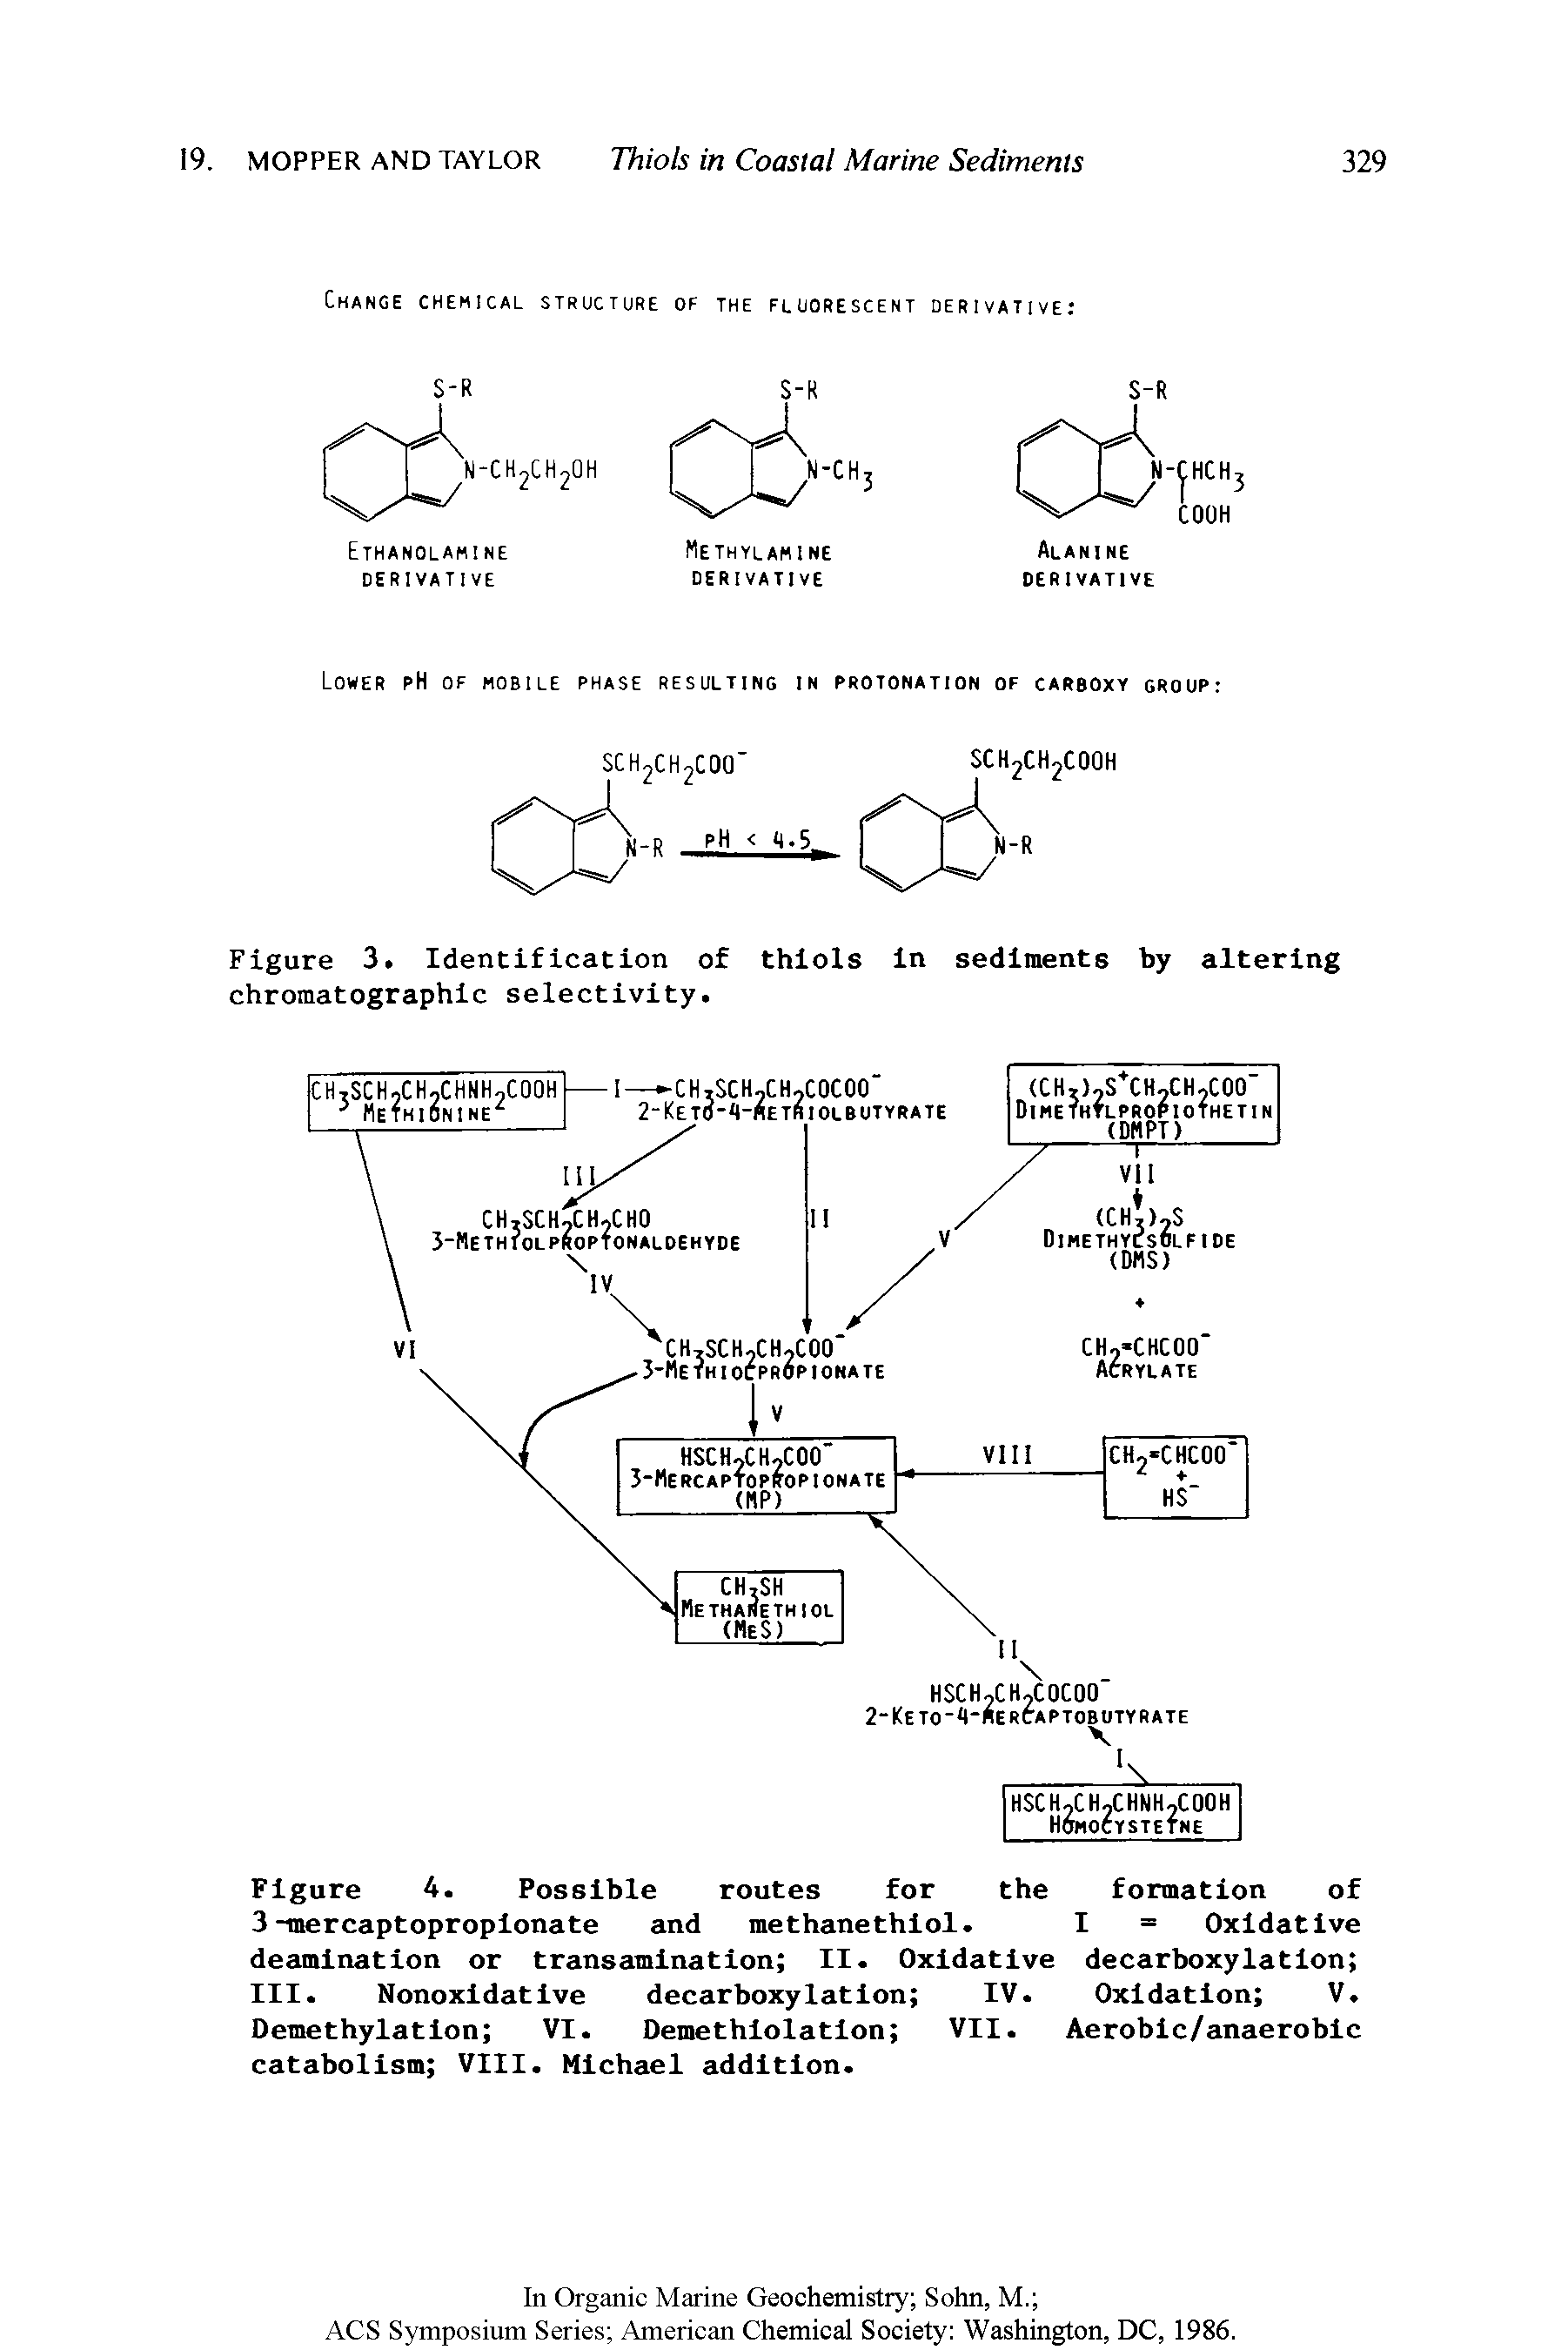 Figure 4. Possible routes for the formation of 3-mercaptoproplonate and methanethlol. I = Oxidative deamination or transamination II. Oxidative decarboxylation III. Nonoxidative decarboxylation IV. Oxidation V. Demethylation VI. Demethlolatlon VII. Aerobic/anaerobic catabolism VIII. Michael addition.